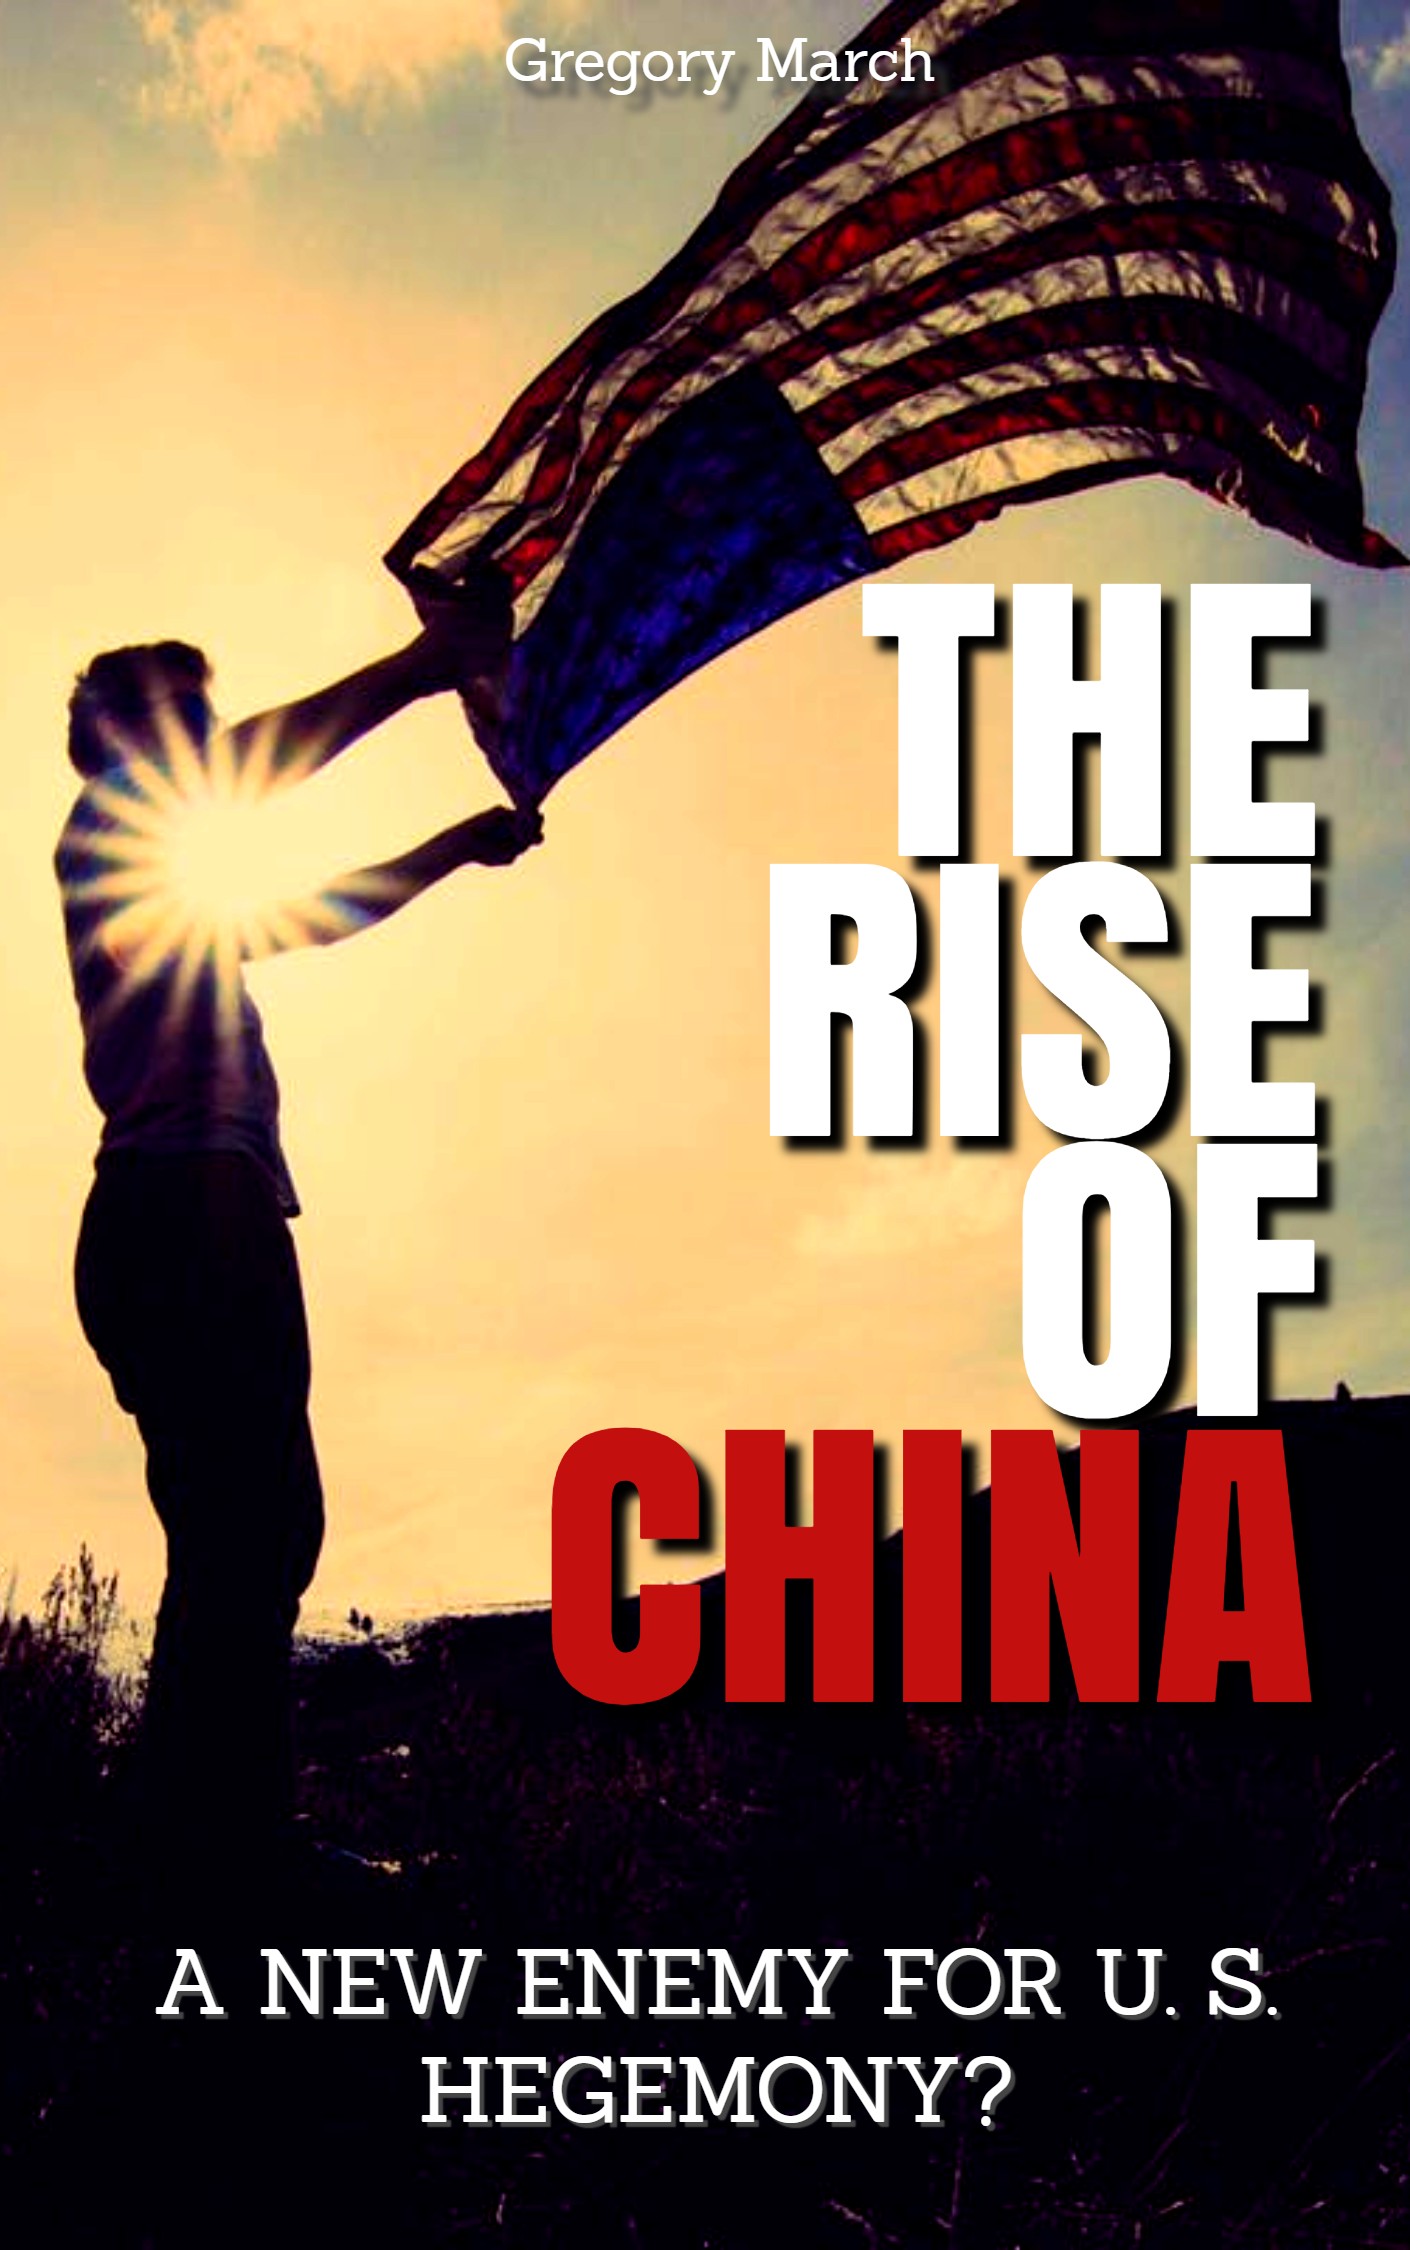 FREE: THE RISE OF CHINA: A NEW ENEMY FOR U. S. HEGEMONY? by Gregory March